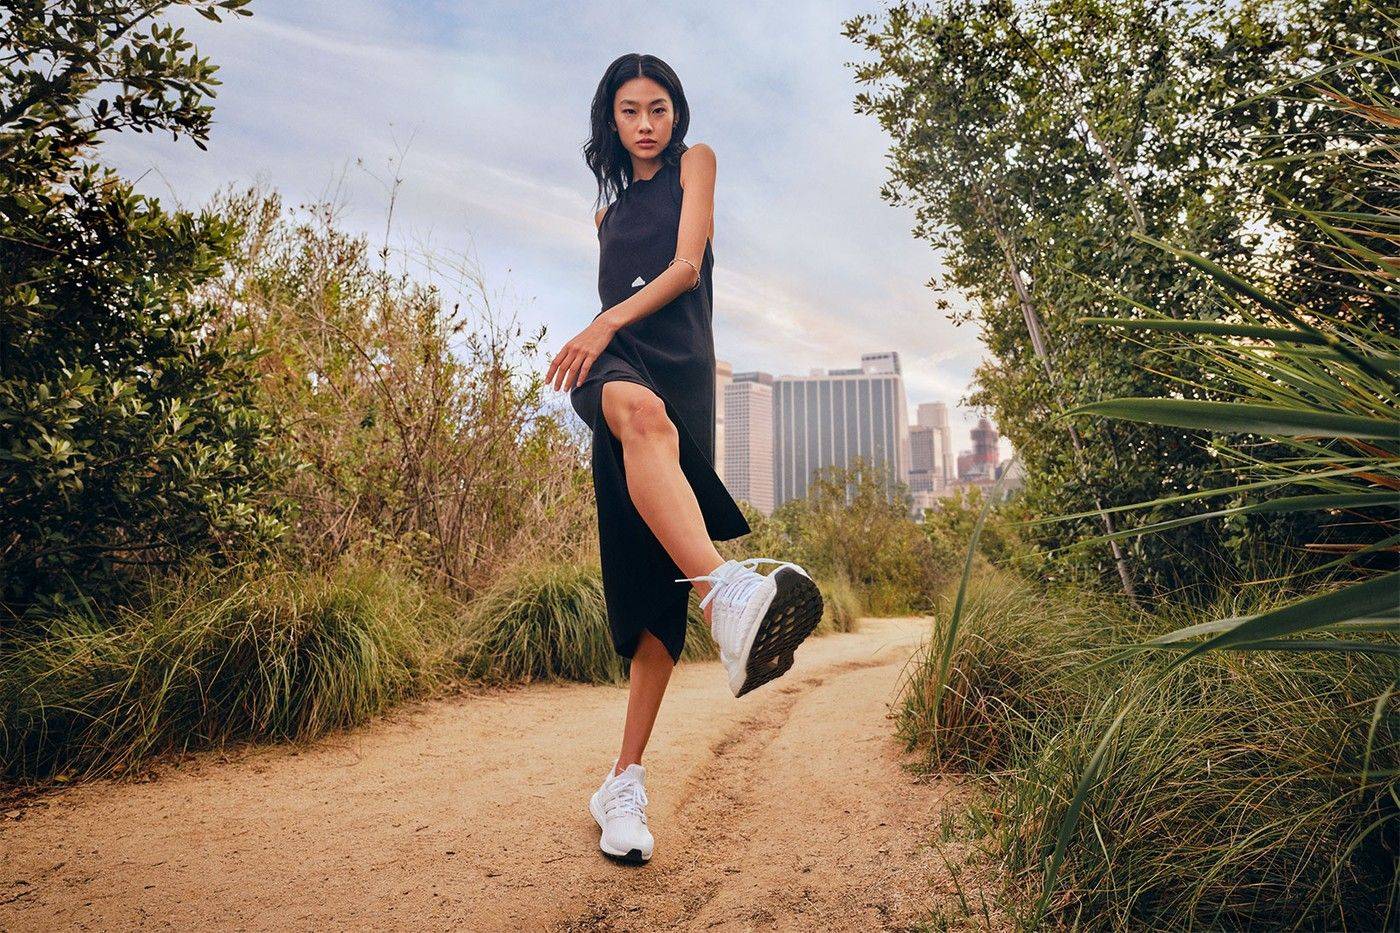 Squid Game star Jung Ho Yeon dons black ribbed dress with Adidas trainers  in new capsule collection : Bollywood News - Bollywood Hungama